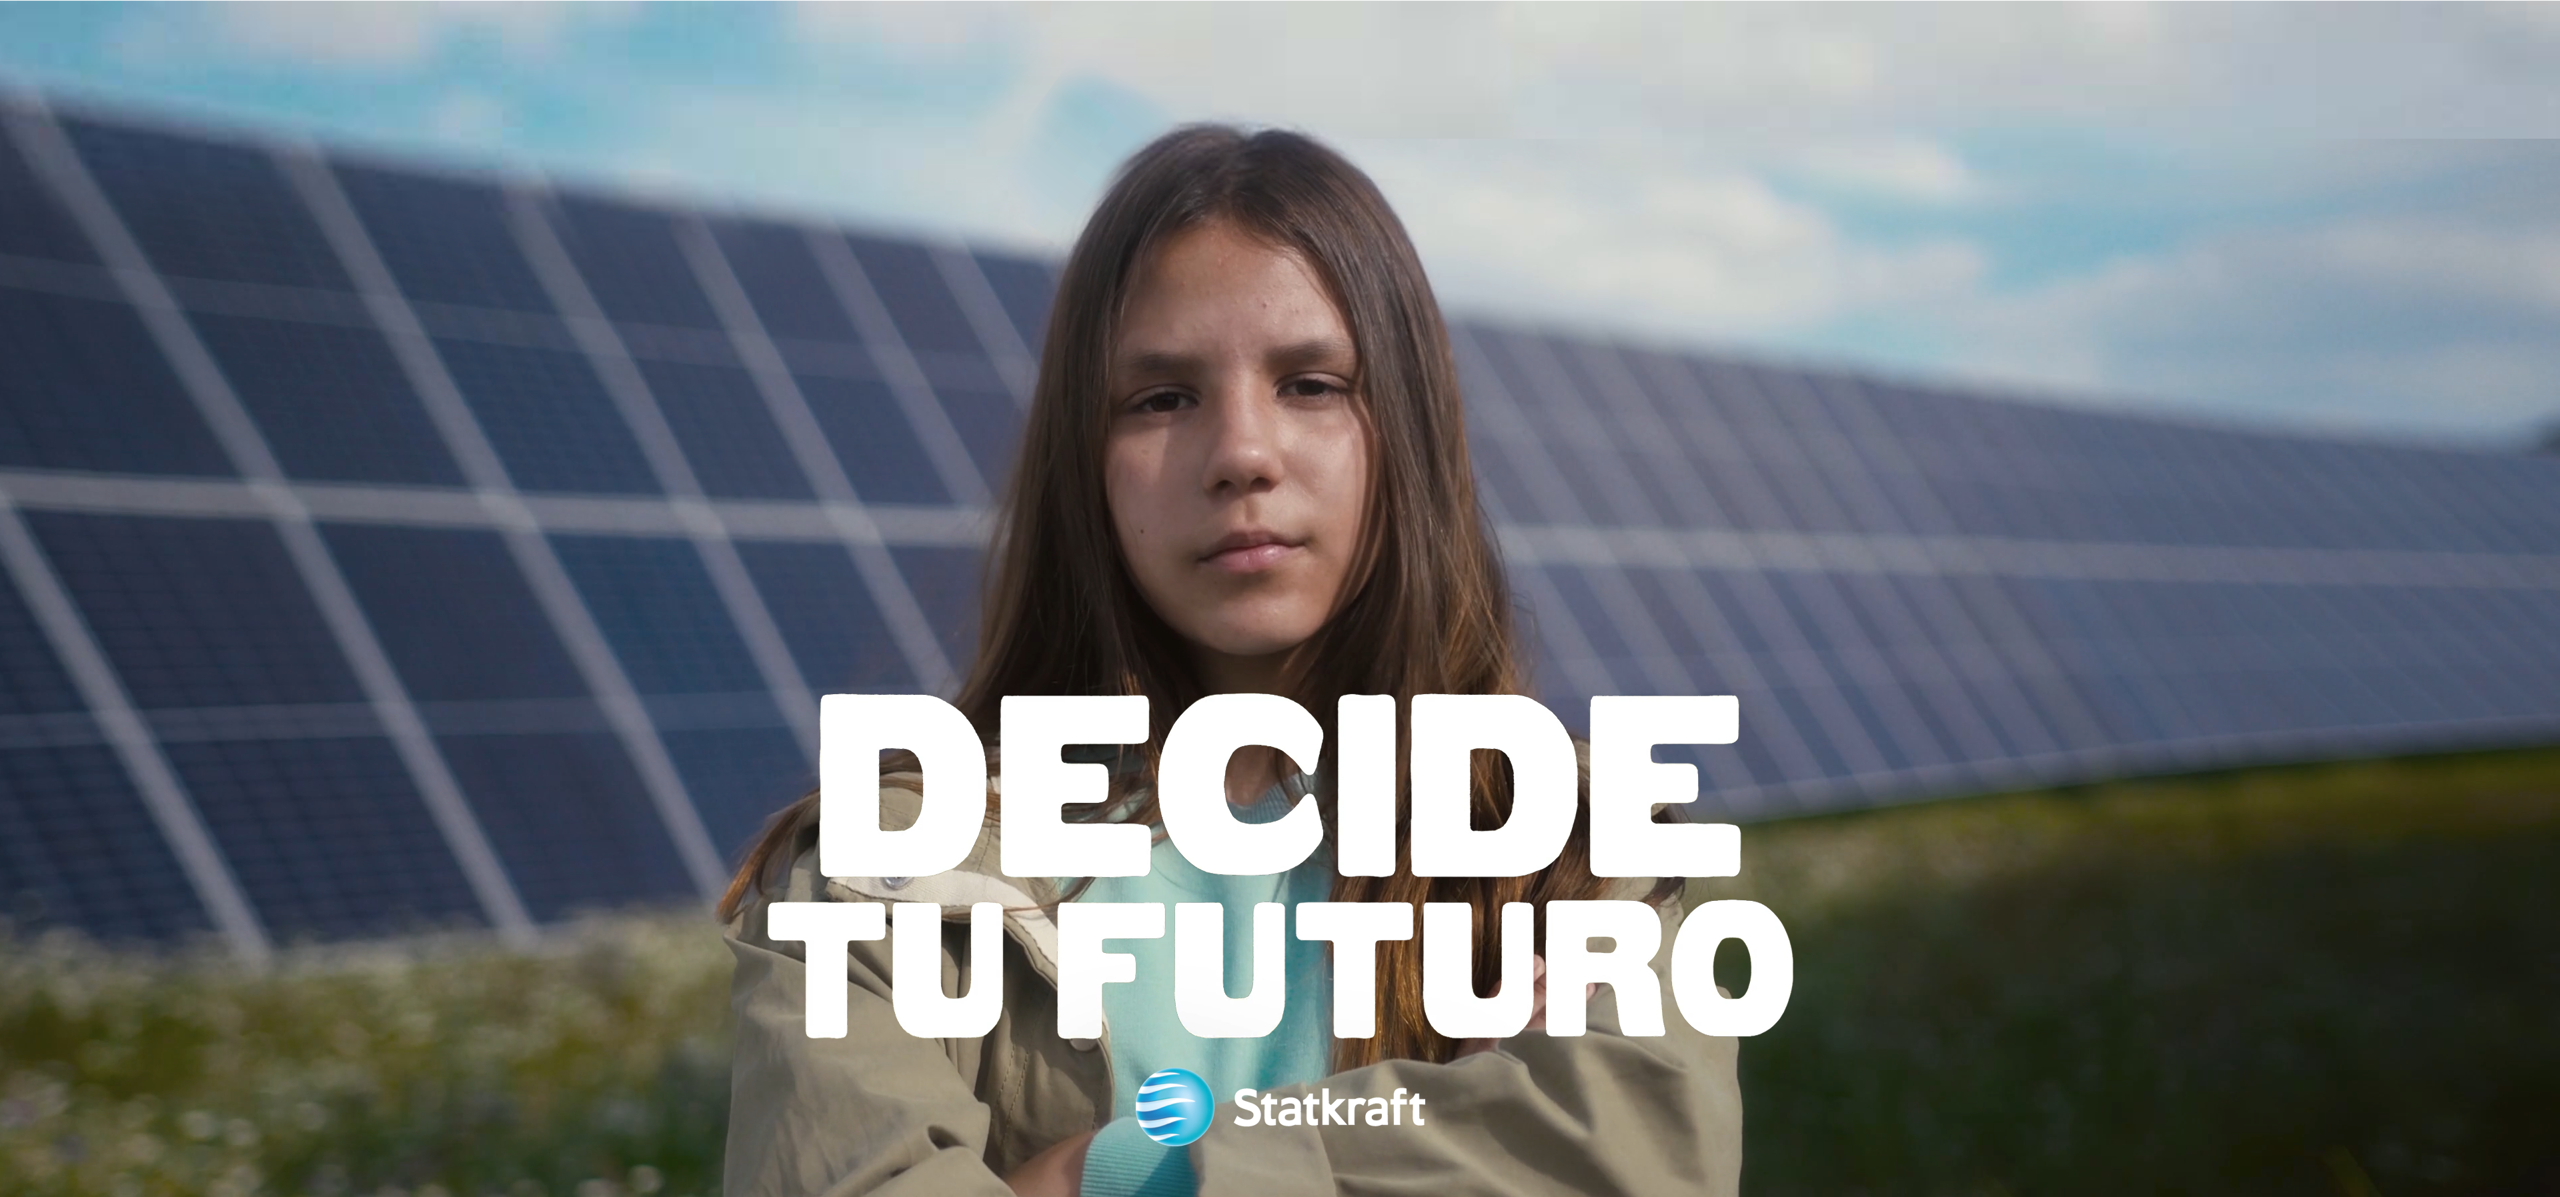 Girl in front of blurry solar panels. Text that says "Decide tu futuro" and the Statkraft logo 